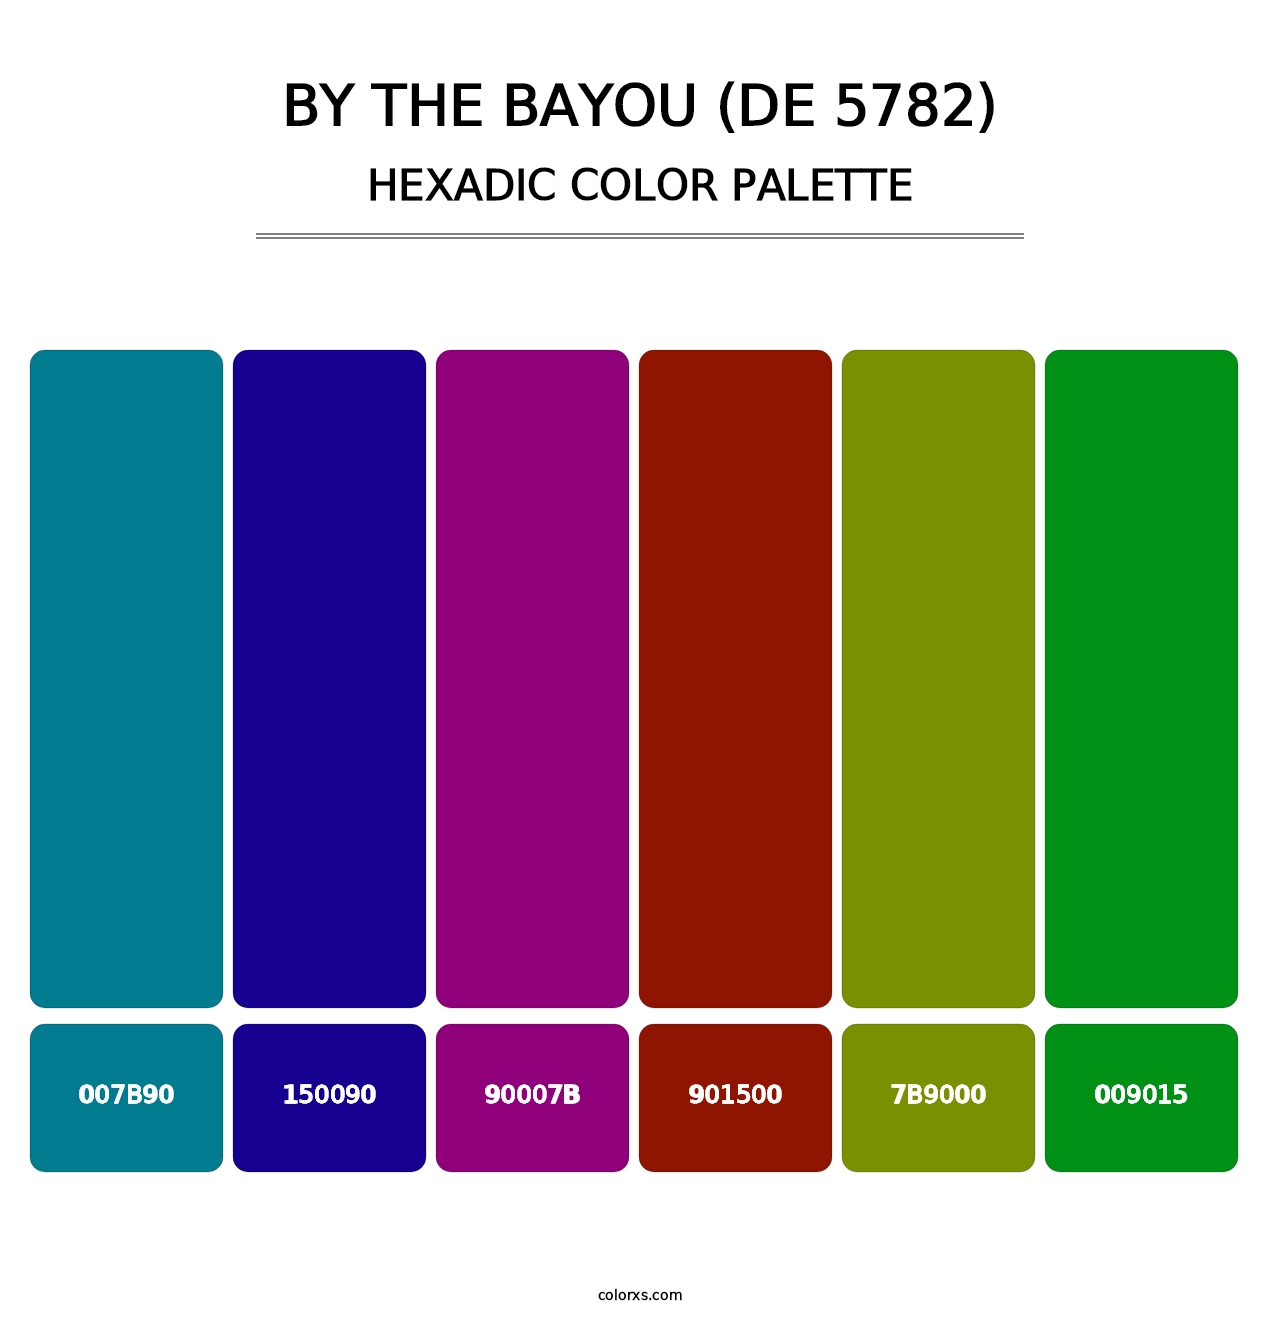 By the Bayou (DE 5782) - Hexadic Color Palette